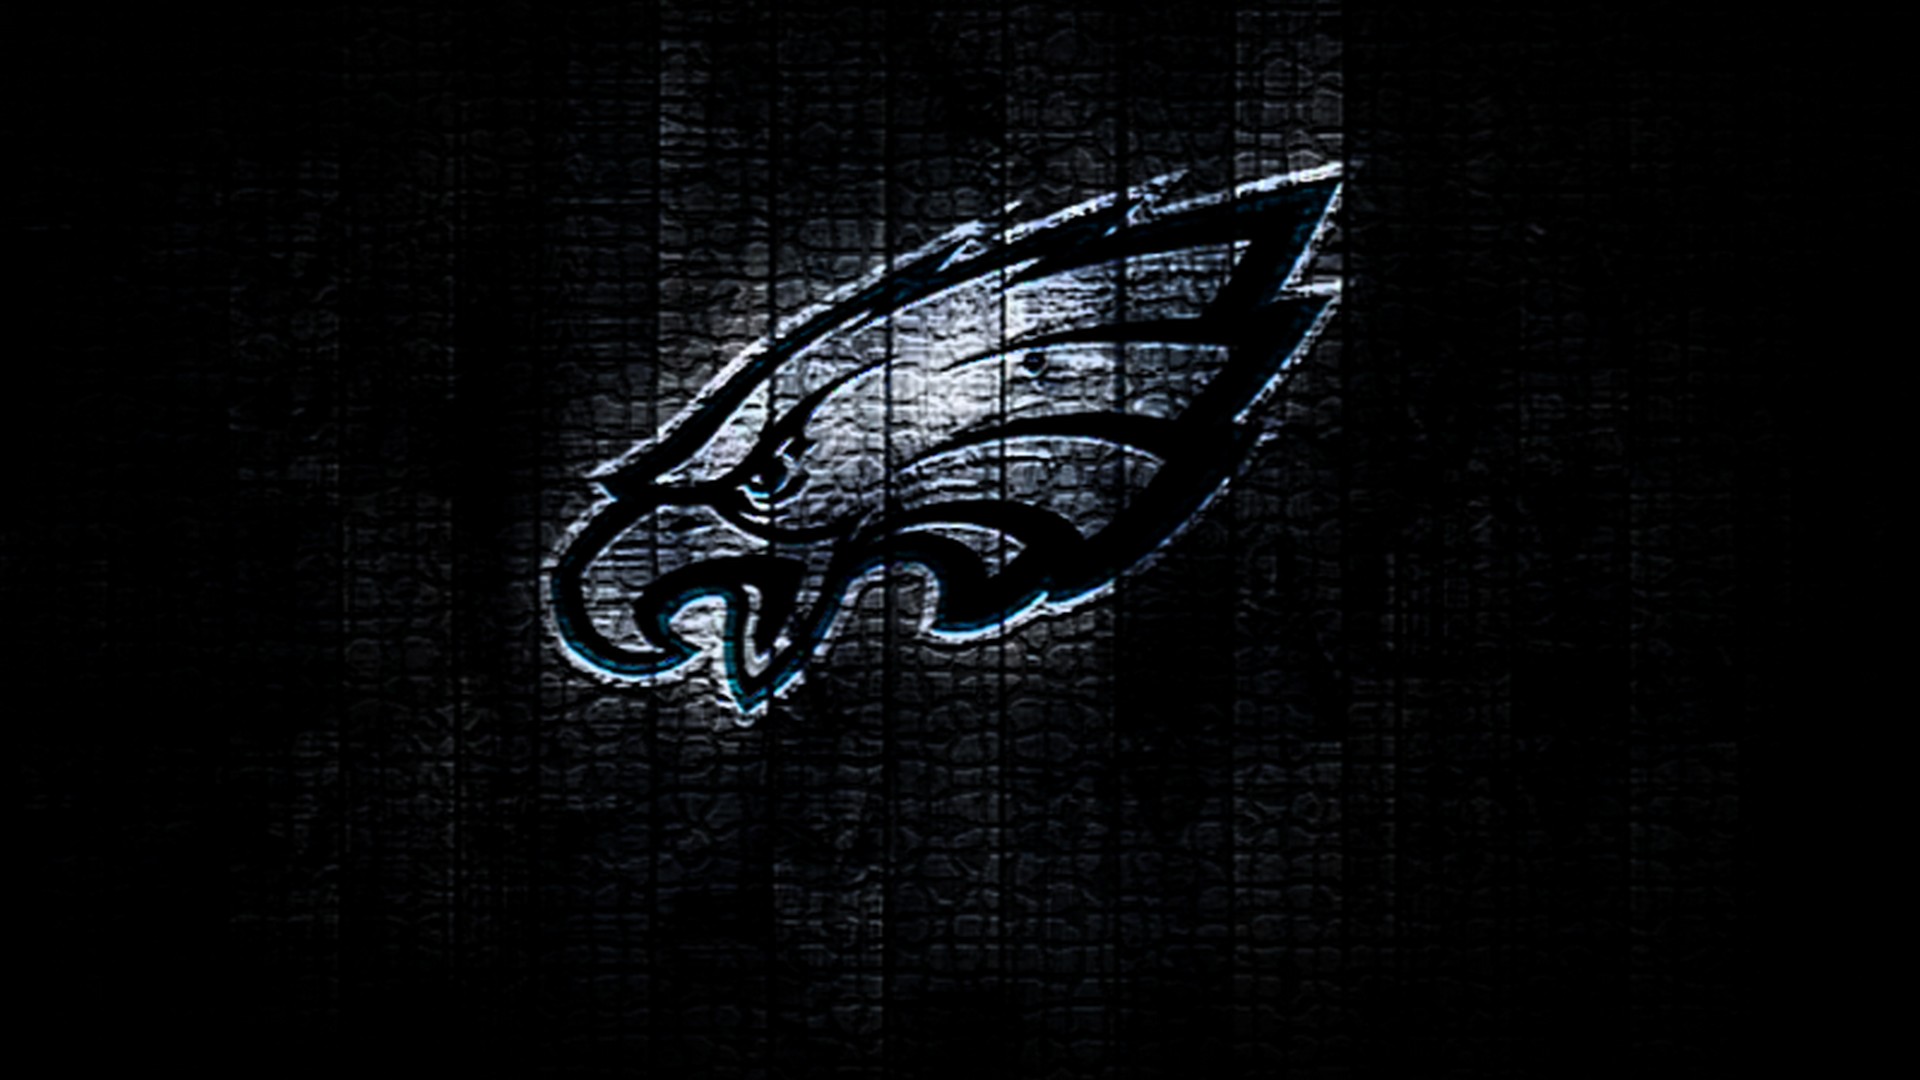 The Eagles HD Wallpapers With Resolution 1920X1080 pixel. You can make this wallpaper for your Mac or Windows Desktop Background, iPhone, Android or Tablet and another Smartphone device for free